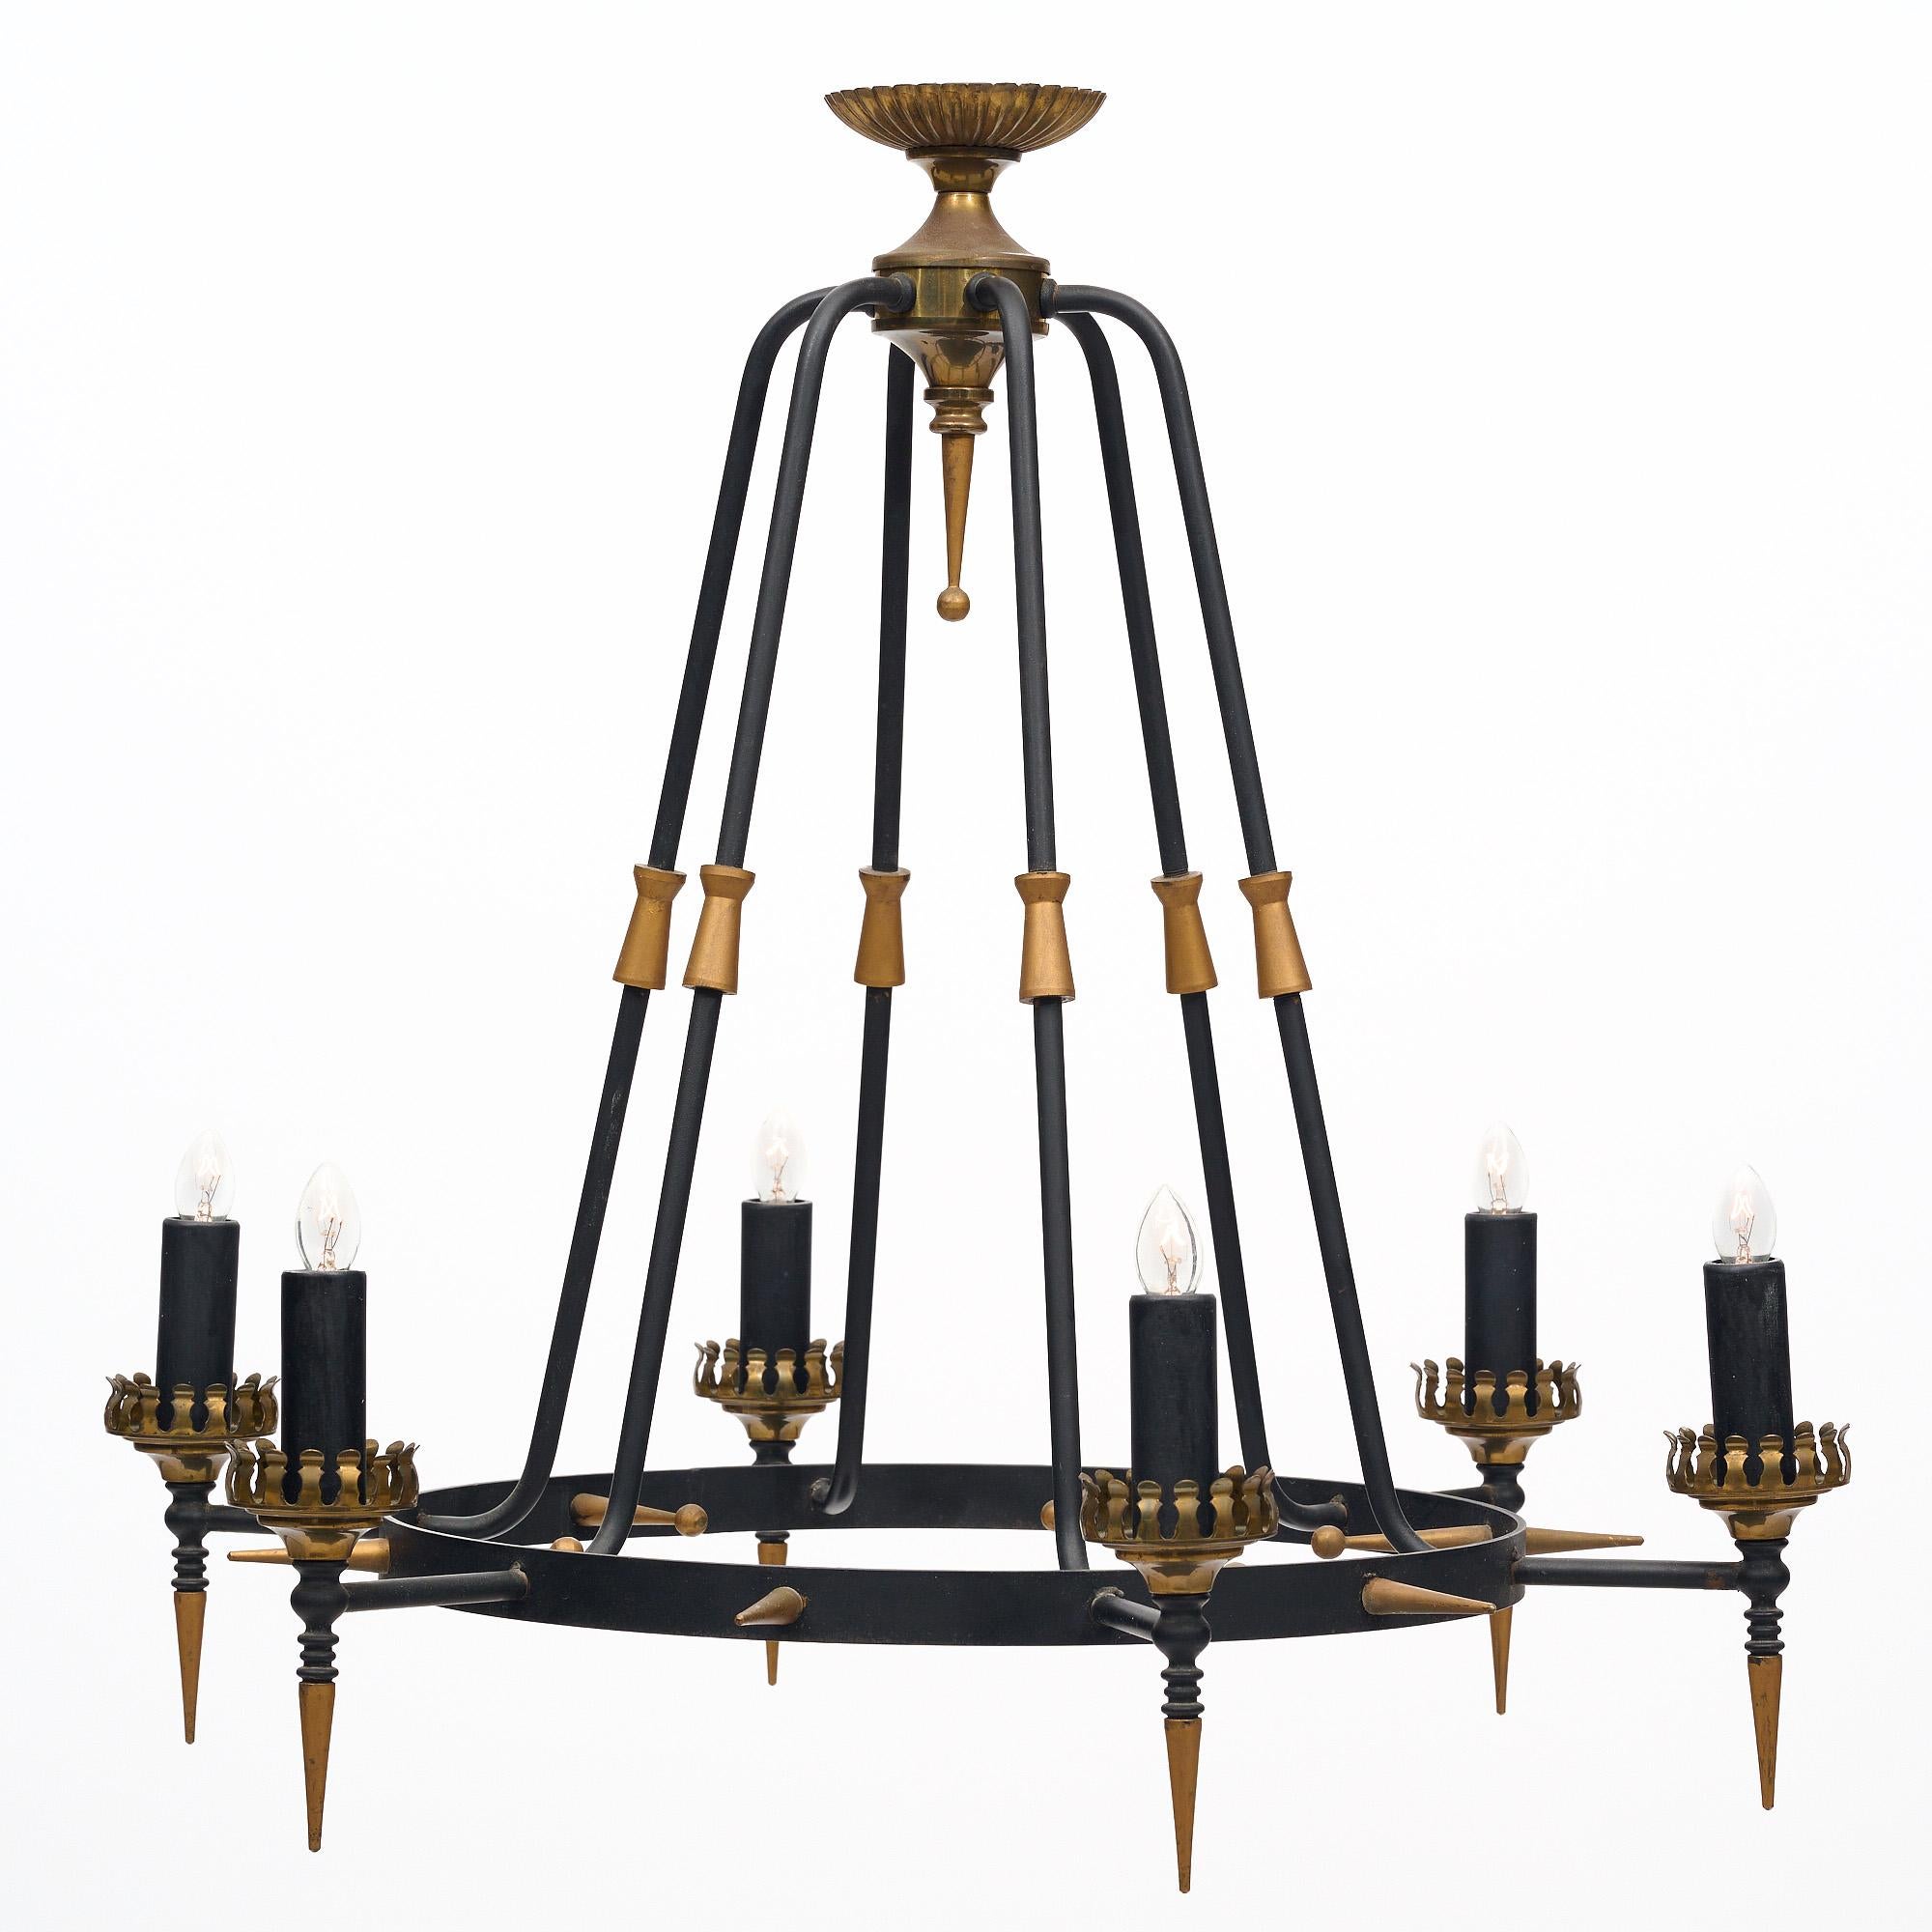 Chandelier from France in the neoclassical style. This piece is made of lacquered steel enhanced with gilt brass accents. It has been newly wired to fit US standards.
